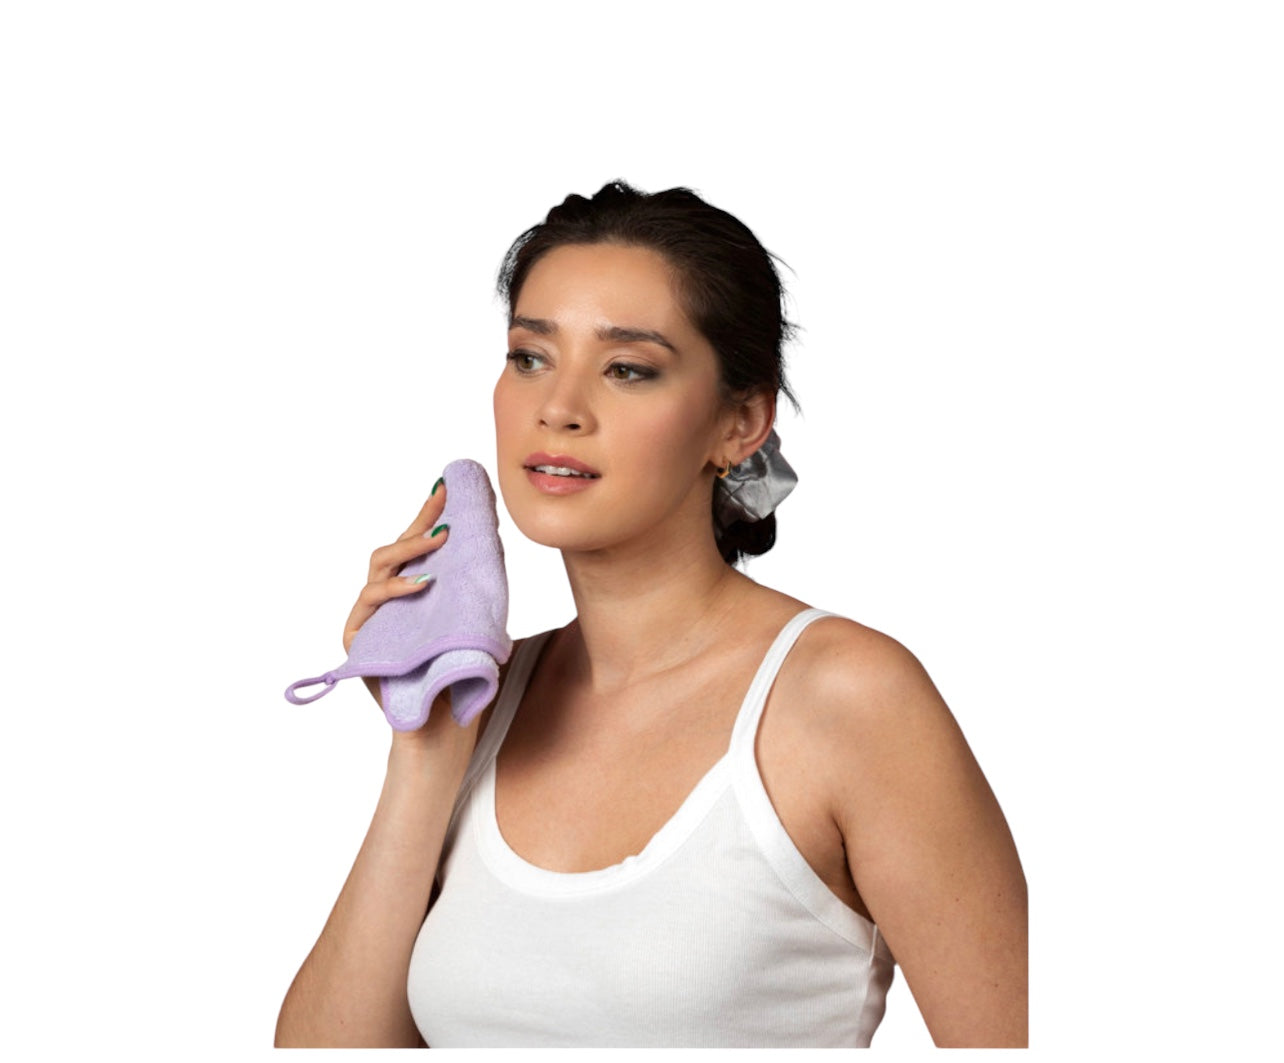 LL Water Works Make-up Removing Towel - Display 24